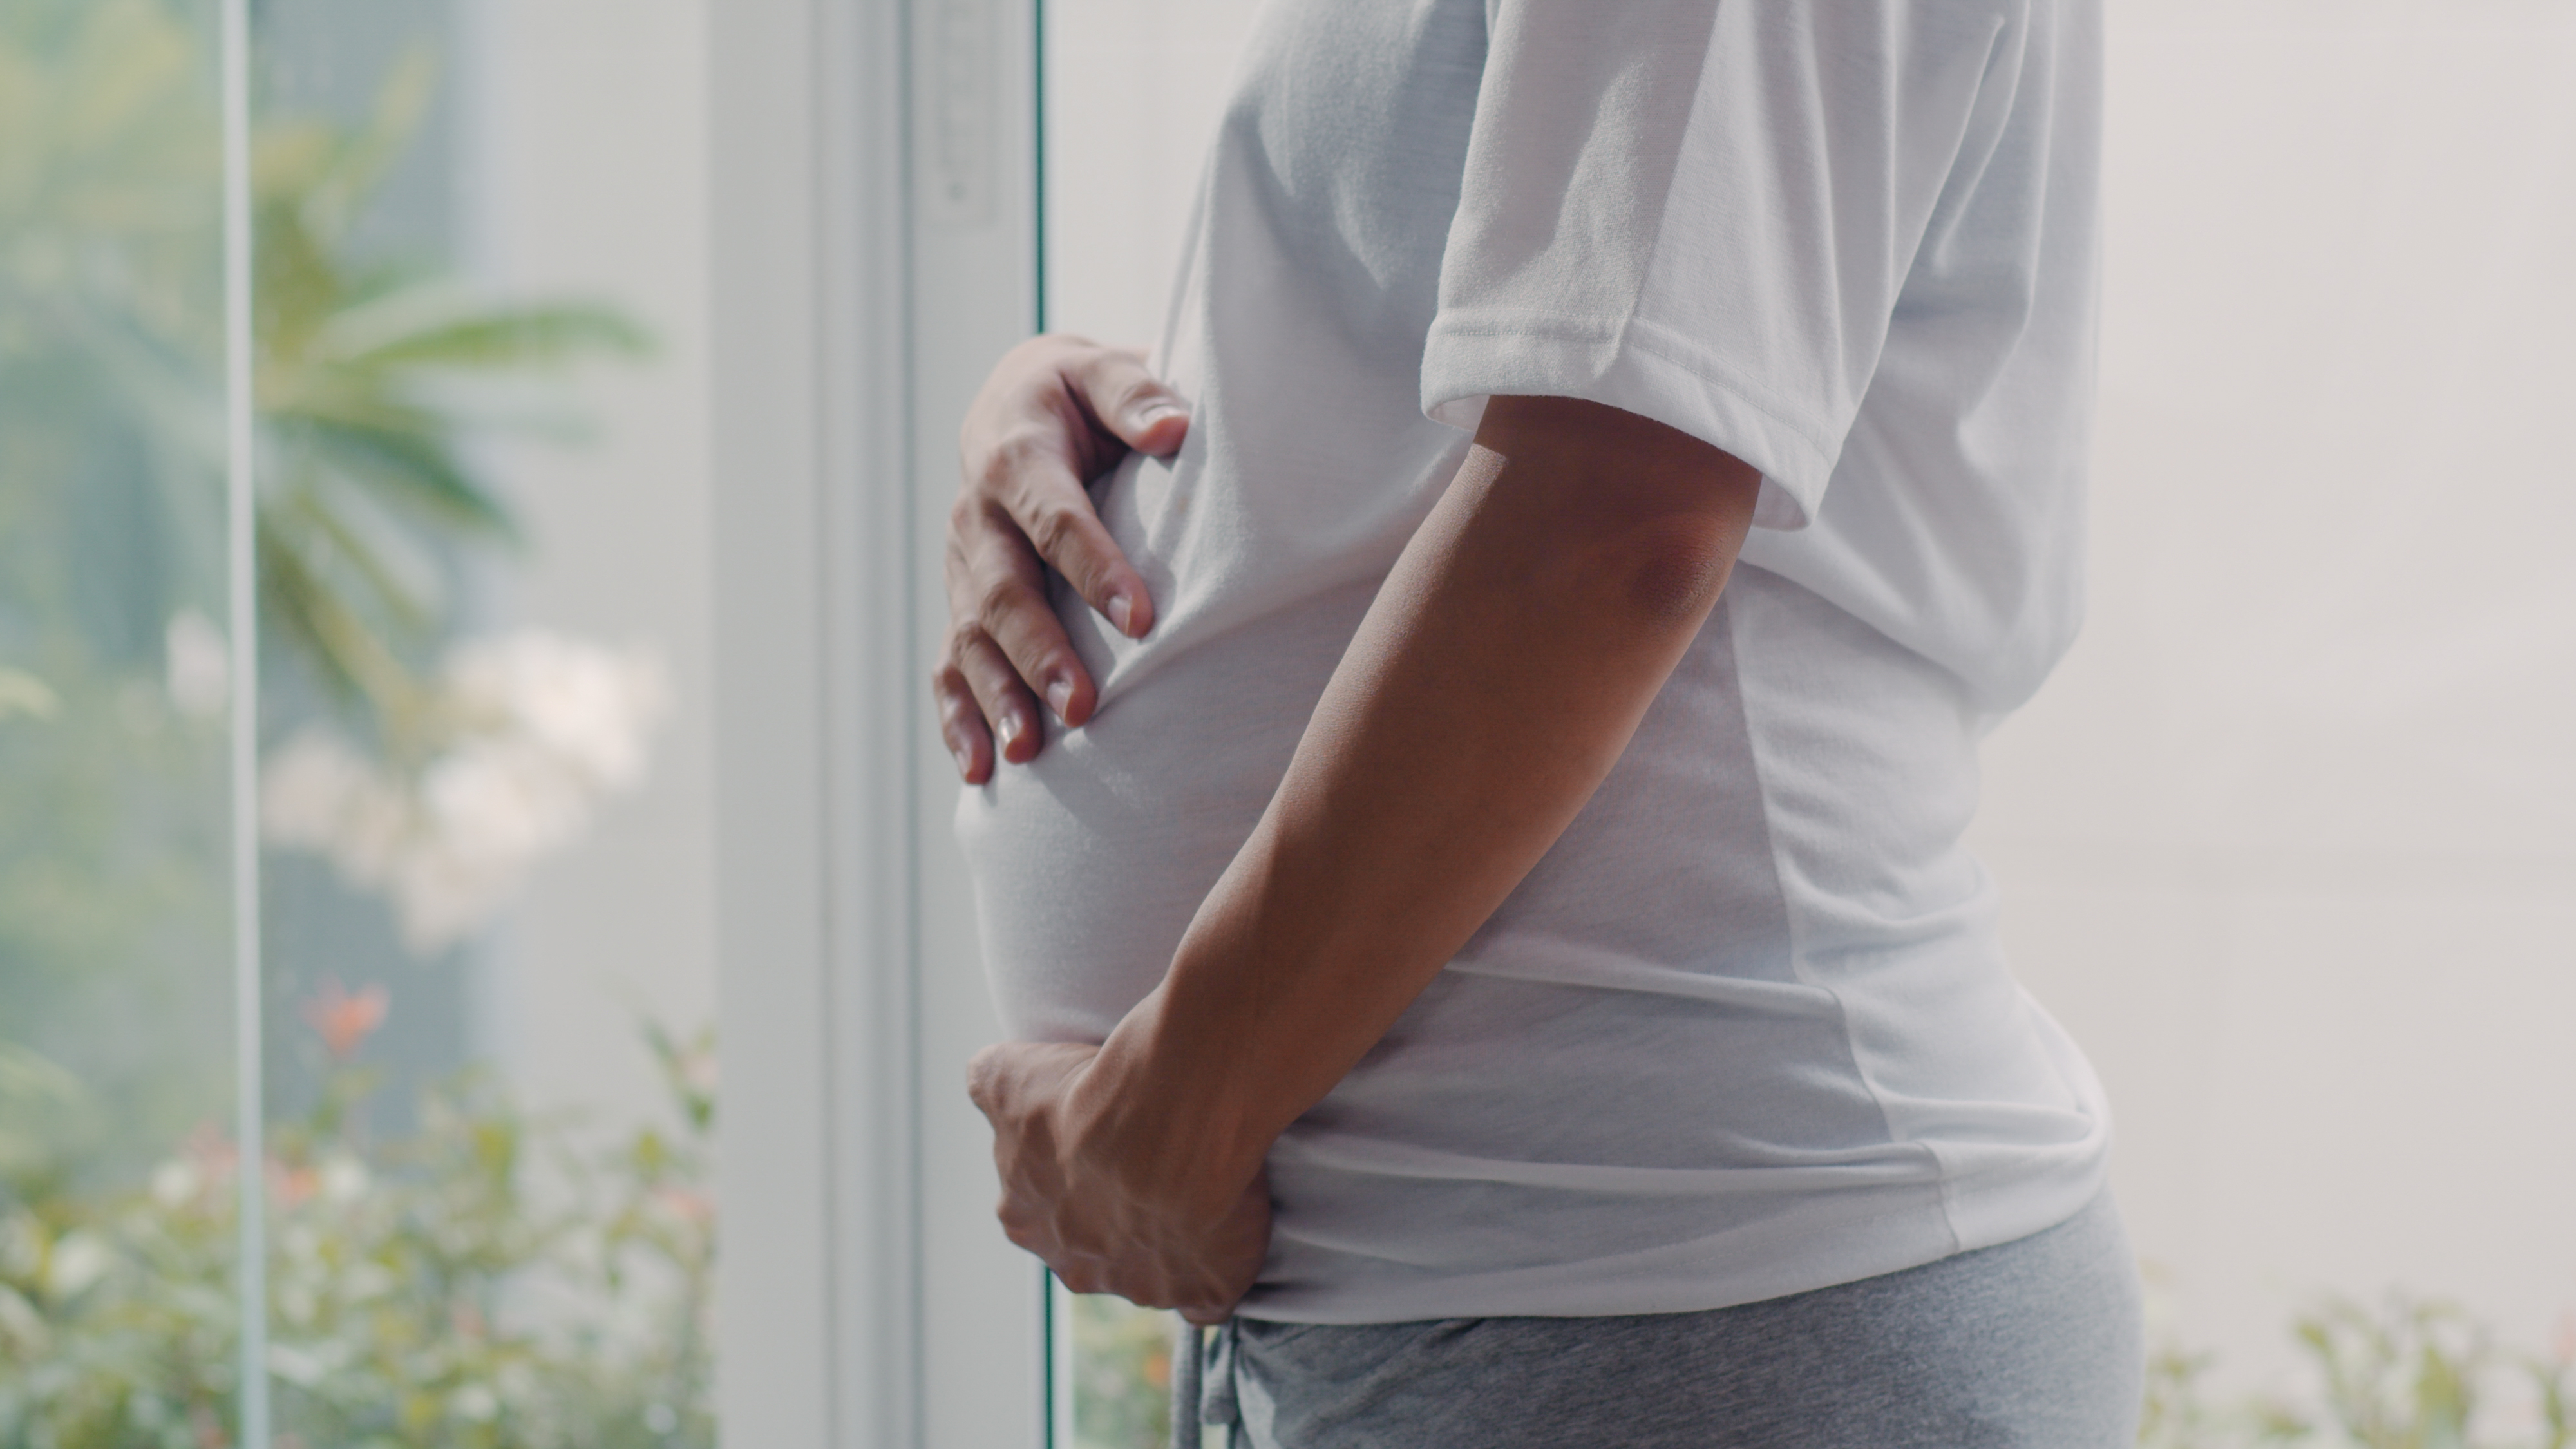 A pregnant woman holding her belly | Source: Shutterstock